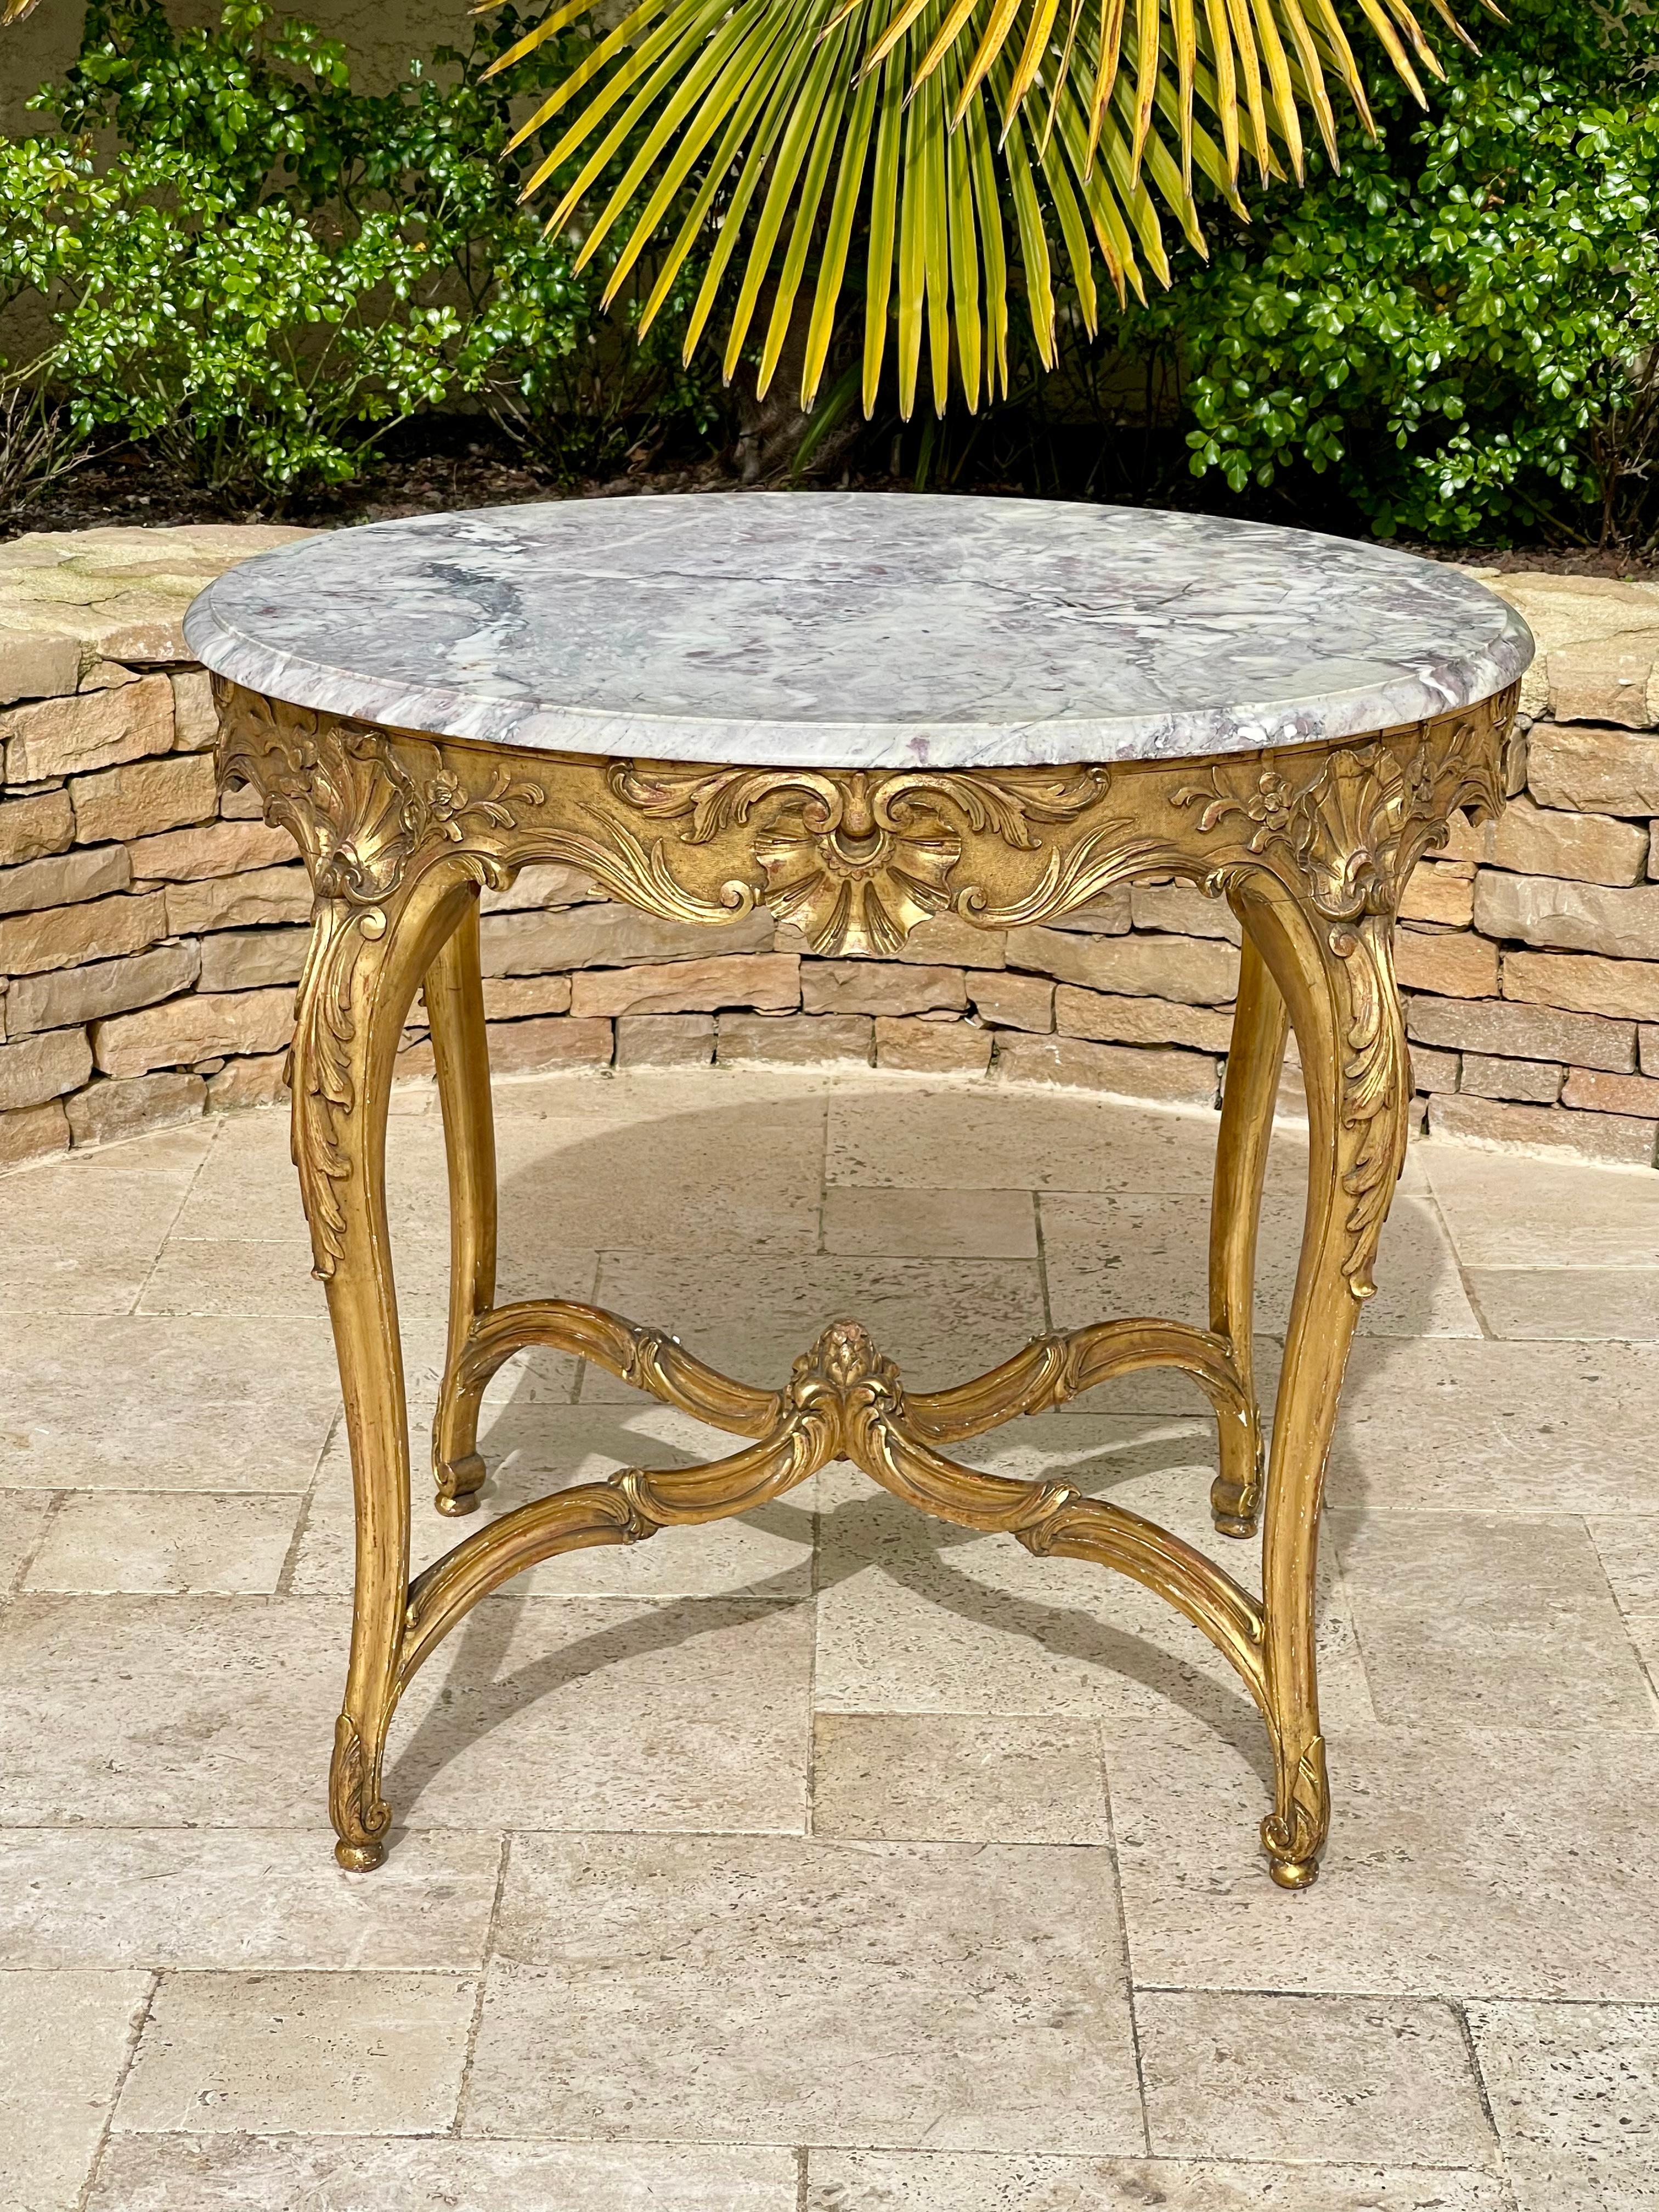 Very pretty Louis XV style gilded wood pedestal table with 4 rocaille legs connected by a spacer. The 4 sides are well decorated with a beautiful scallop shell in the center each time. Marble top with corbin beak Late 19th century around 1880.